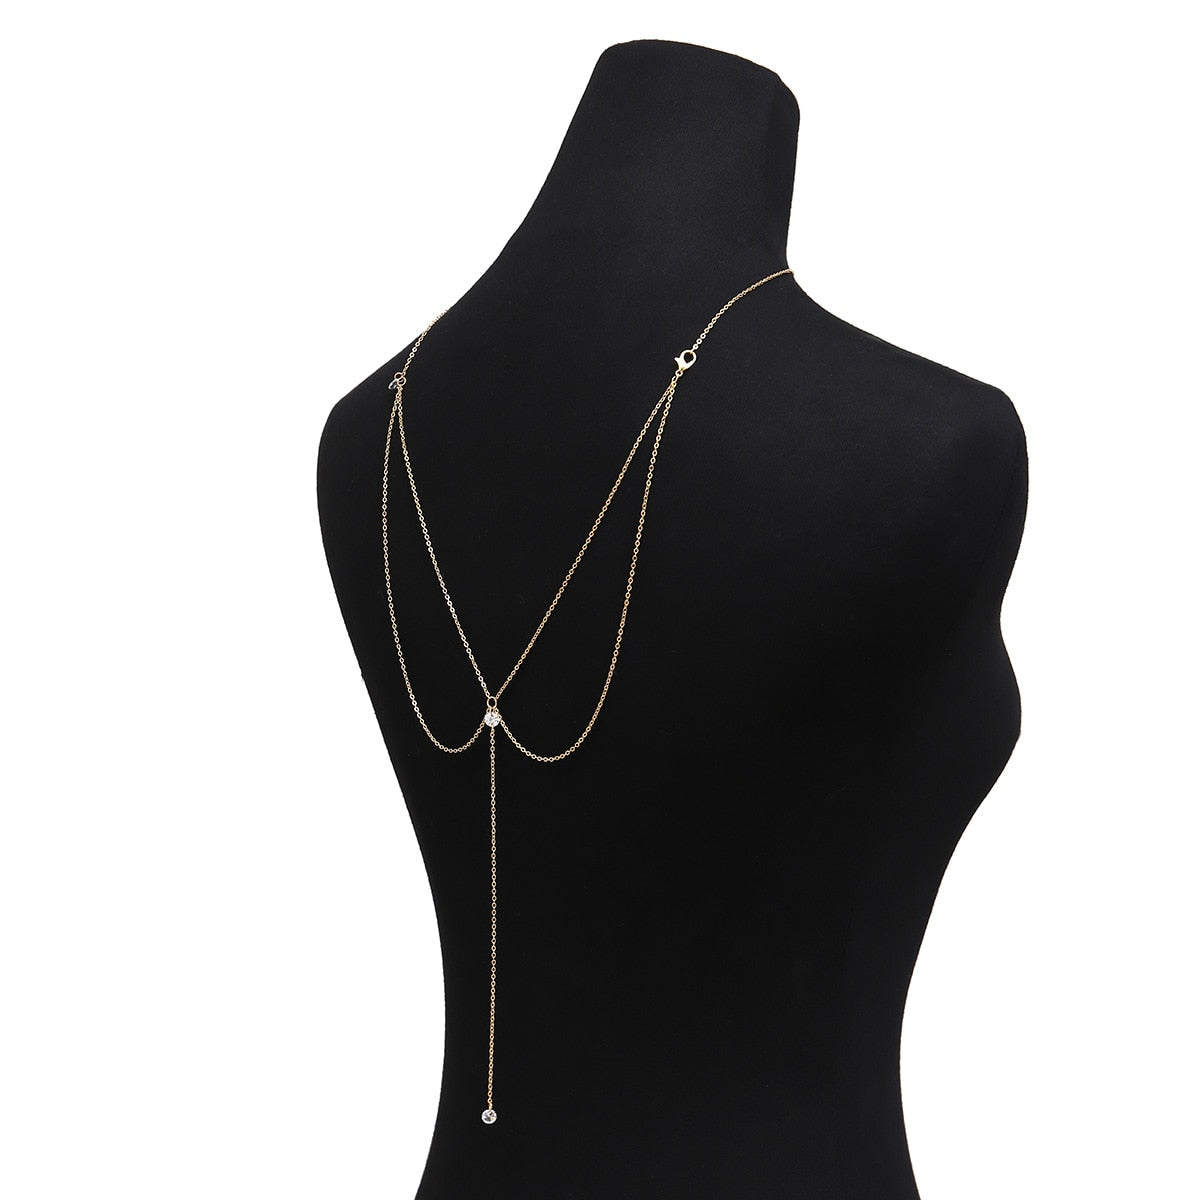 Long golden women's necklace with crystal pendant for back